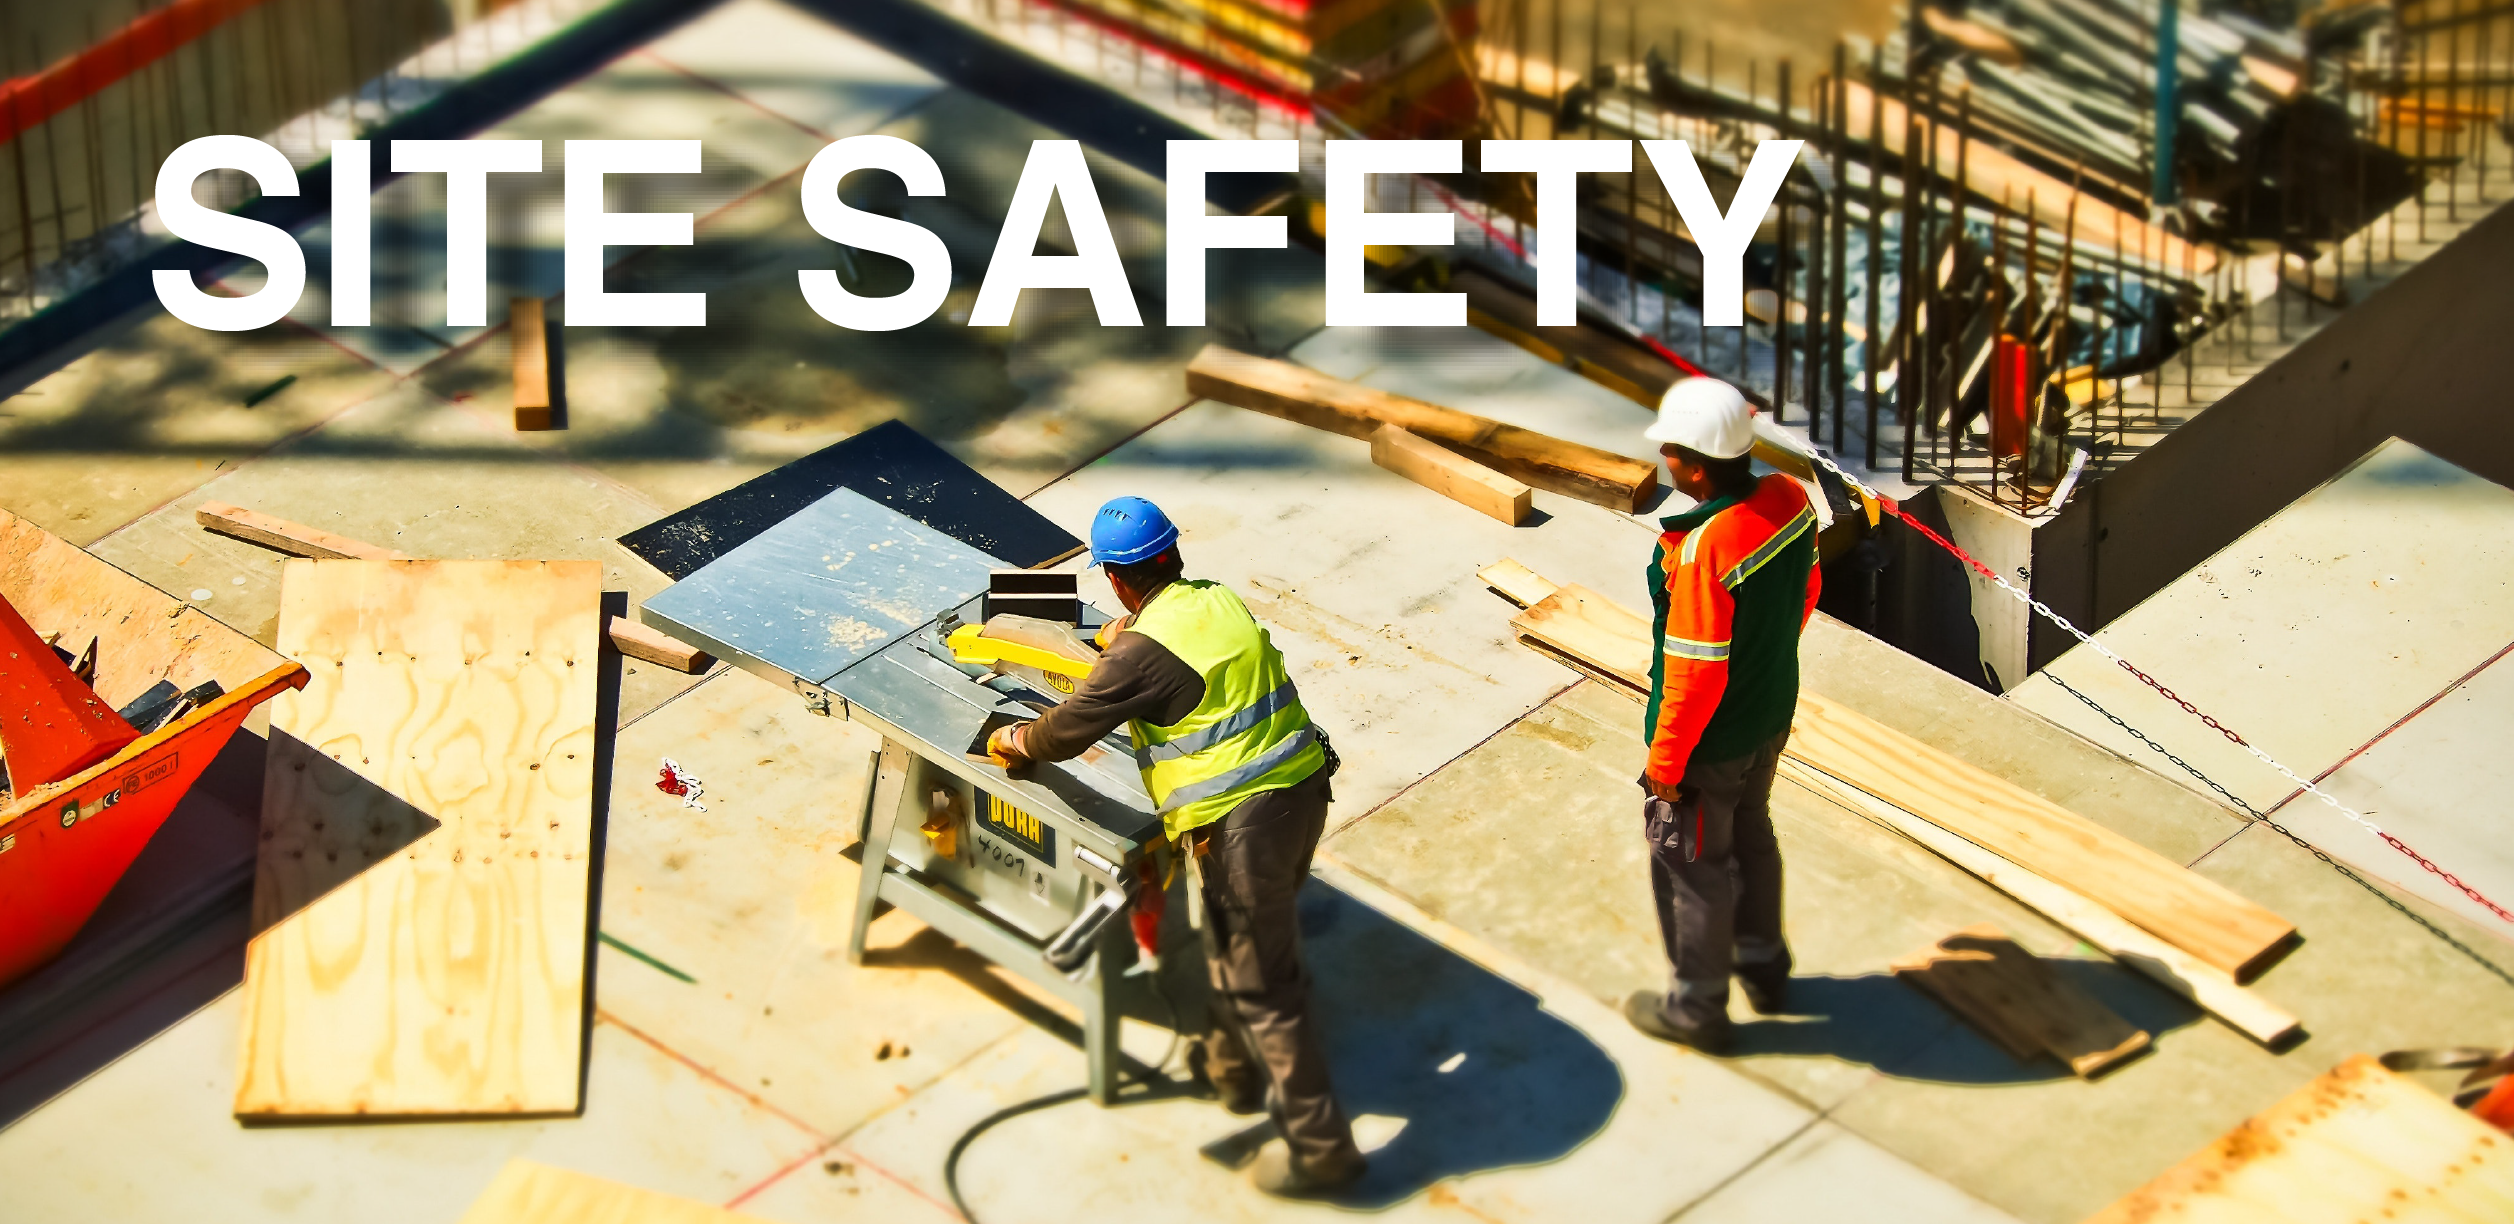 Staying Safe on Site